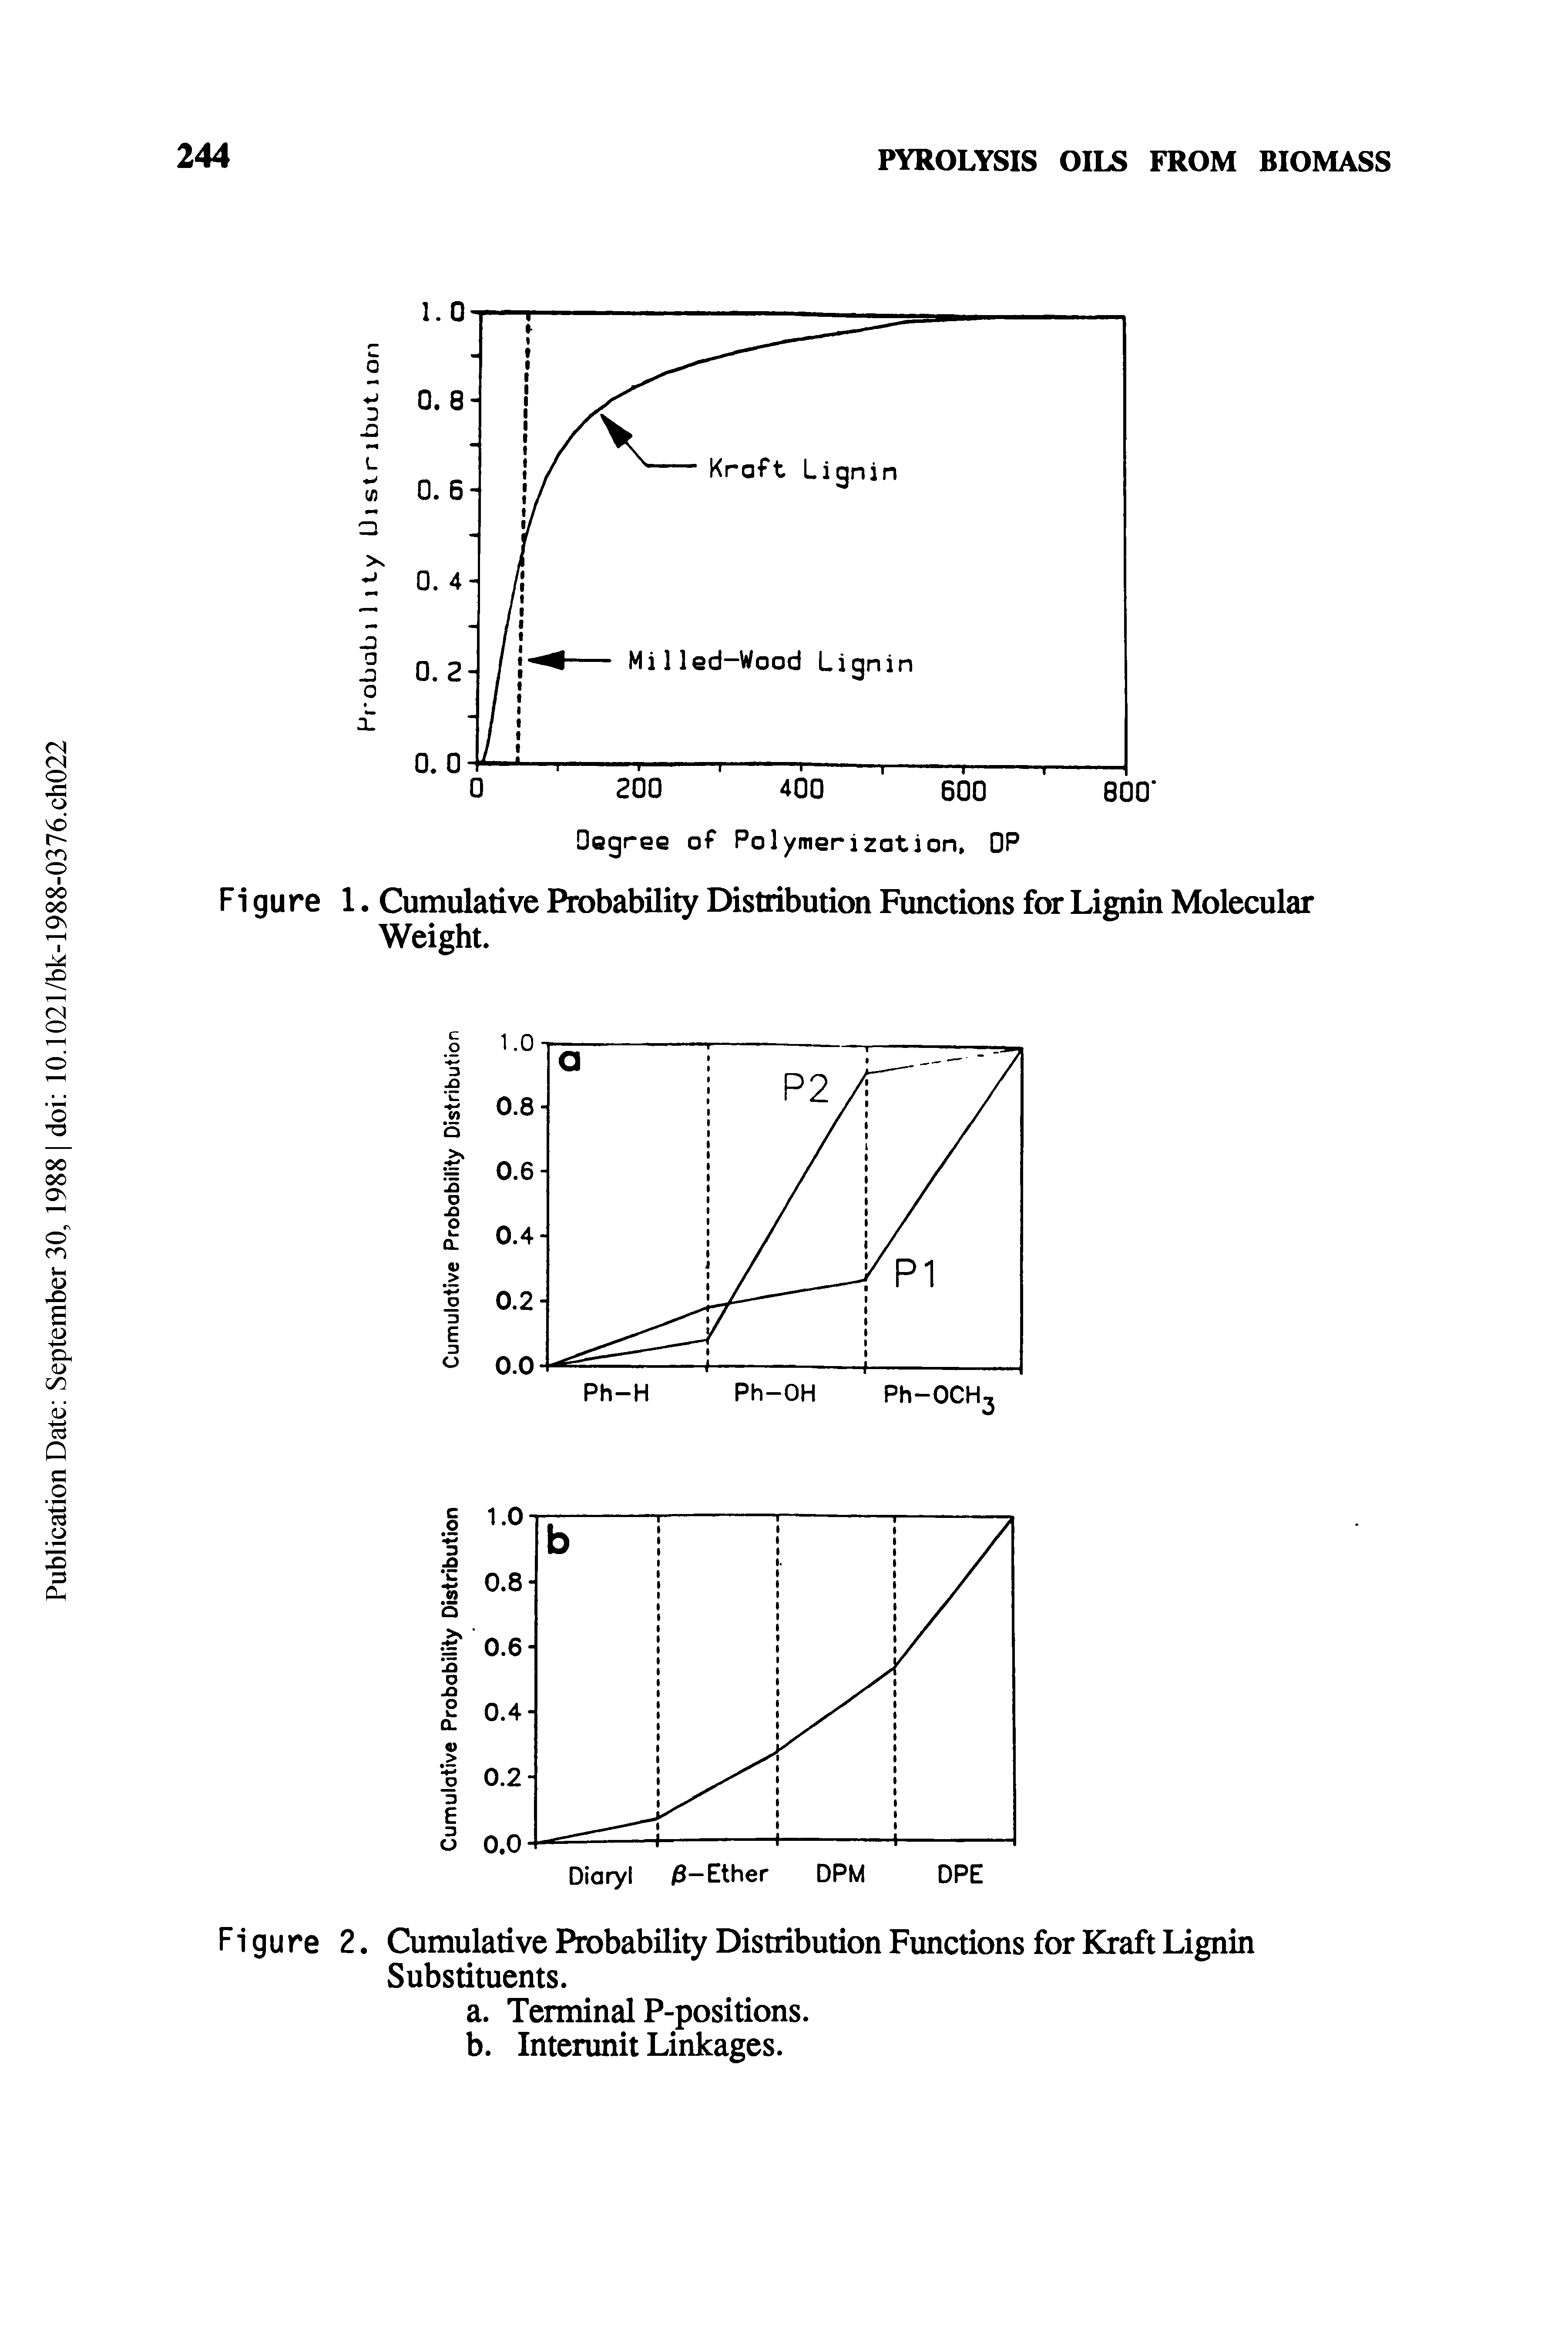 Figure 1. Cumulative Probability Distribution Functions for Lignin Molecular Weight.